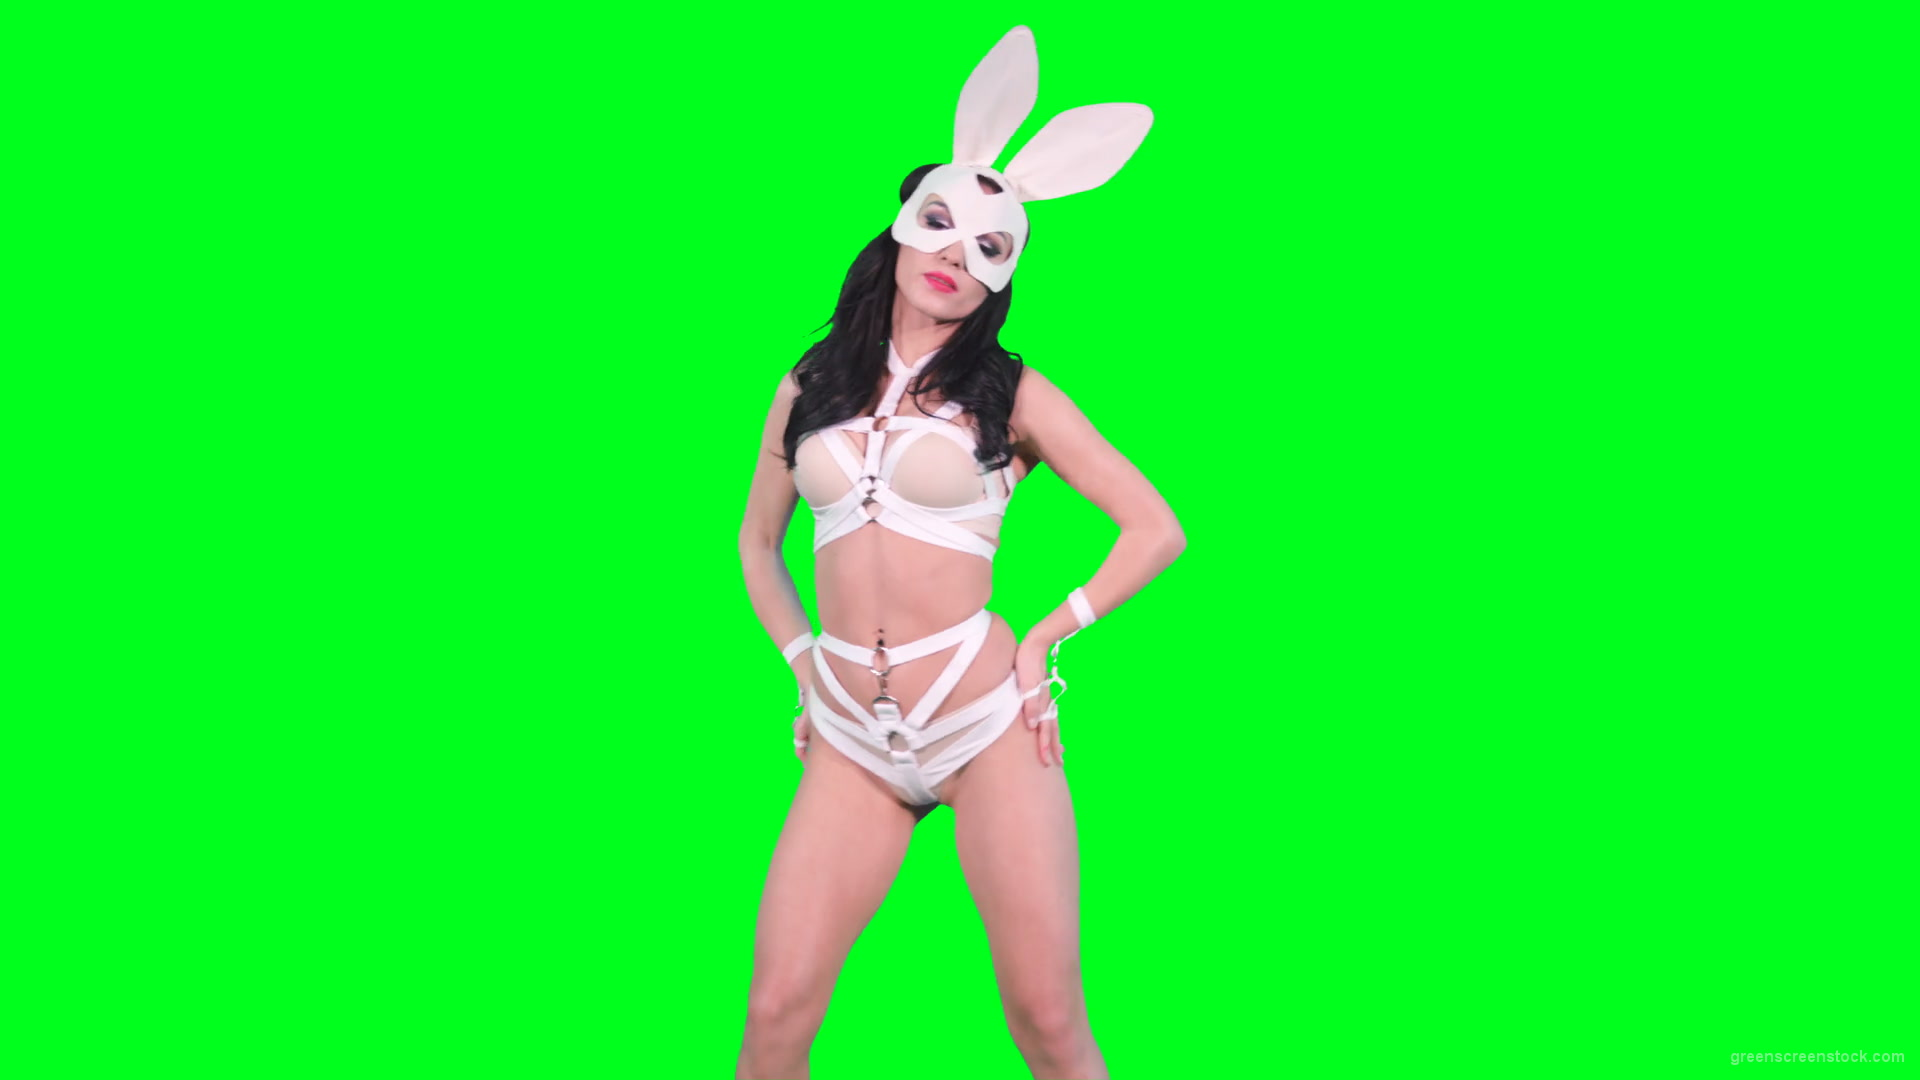 Sexy-bunny-girl-in-rabbit-costume-on-green-screen-4K-Video-Footage-1920_008 Green Screen Stock